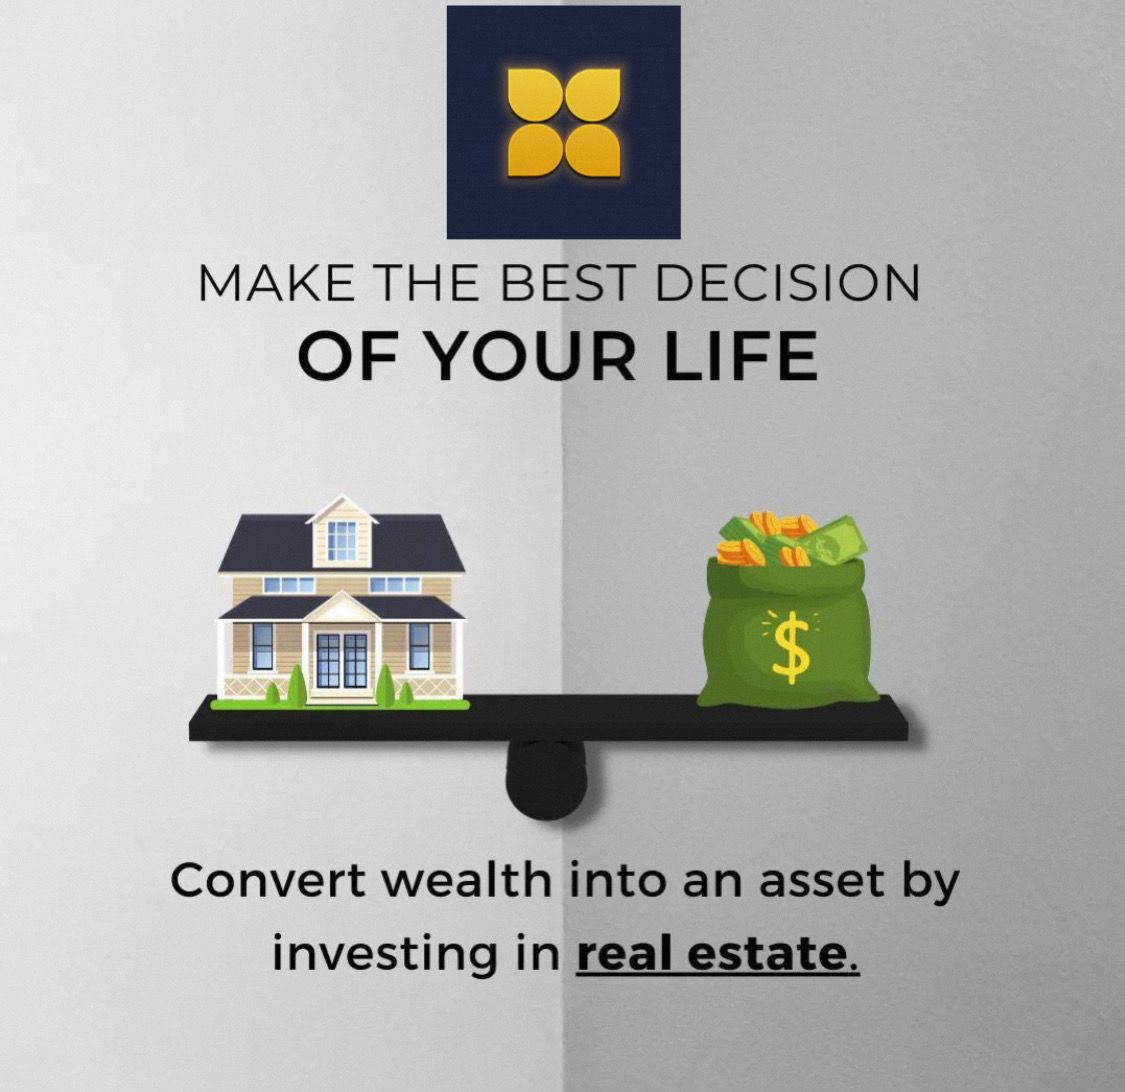 Real estate is the “get rich slowly” scheme for the average person. And we all know slow and steady wins the race.

#makethebestdecision #bestdecision #bestdecisionofmylife #buildwealth #wealthtips #wealthbuilding #investment #investmentproperty #realestateassets